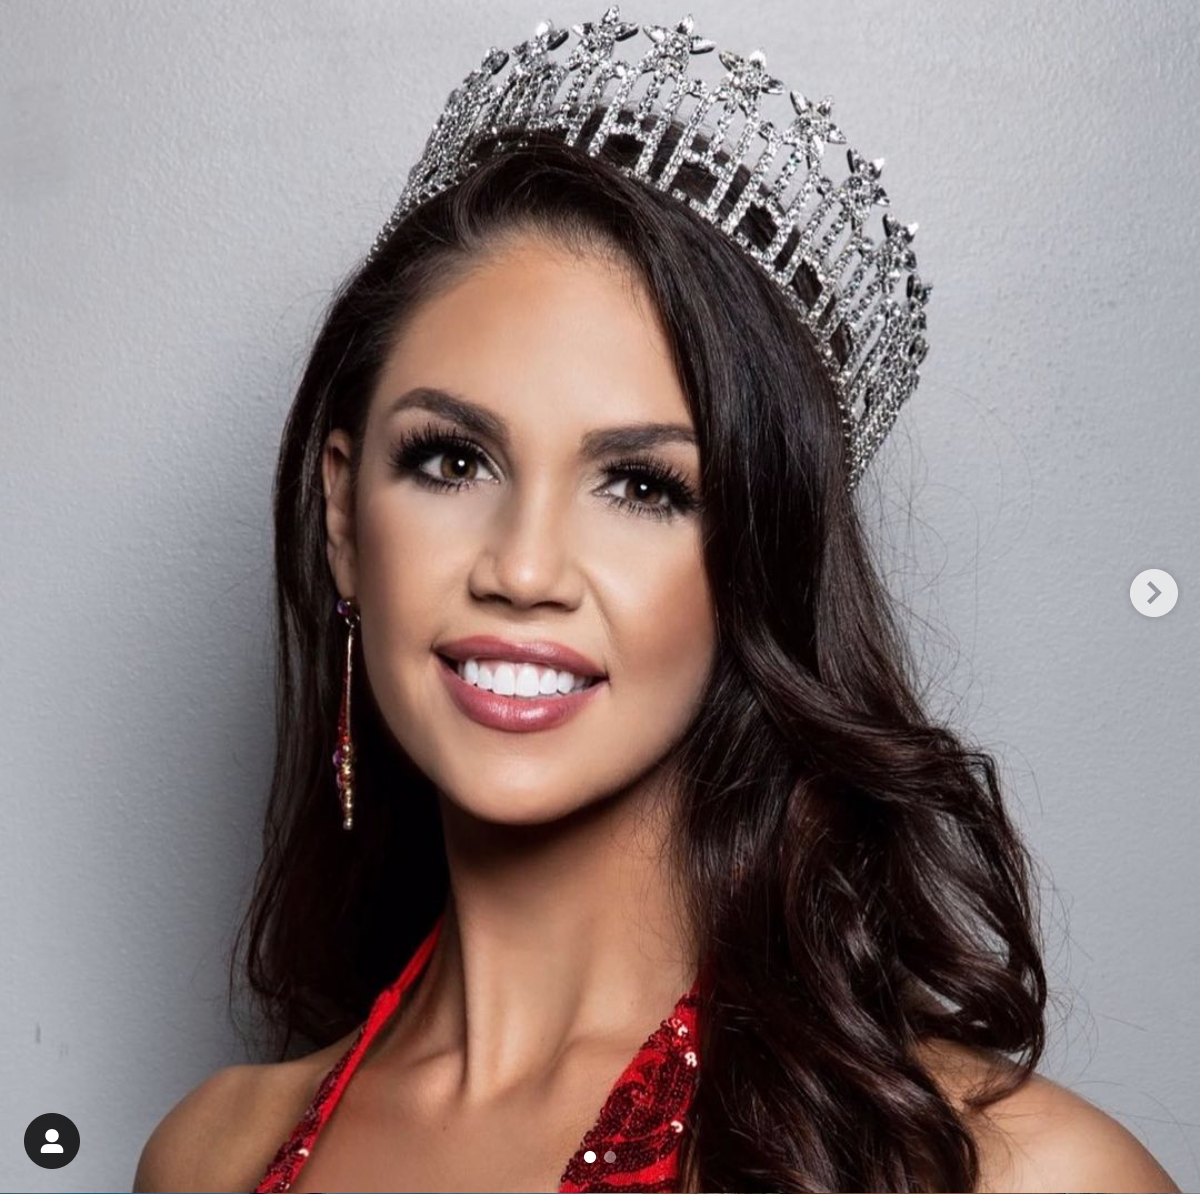 Miss Oregon USA - Allison Cook (Drafted by: Cherrish)